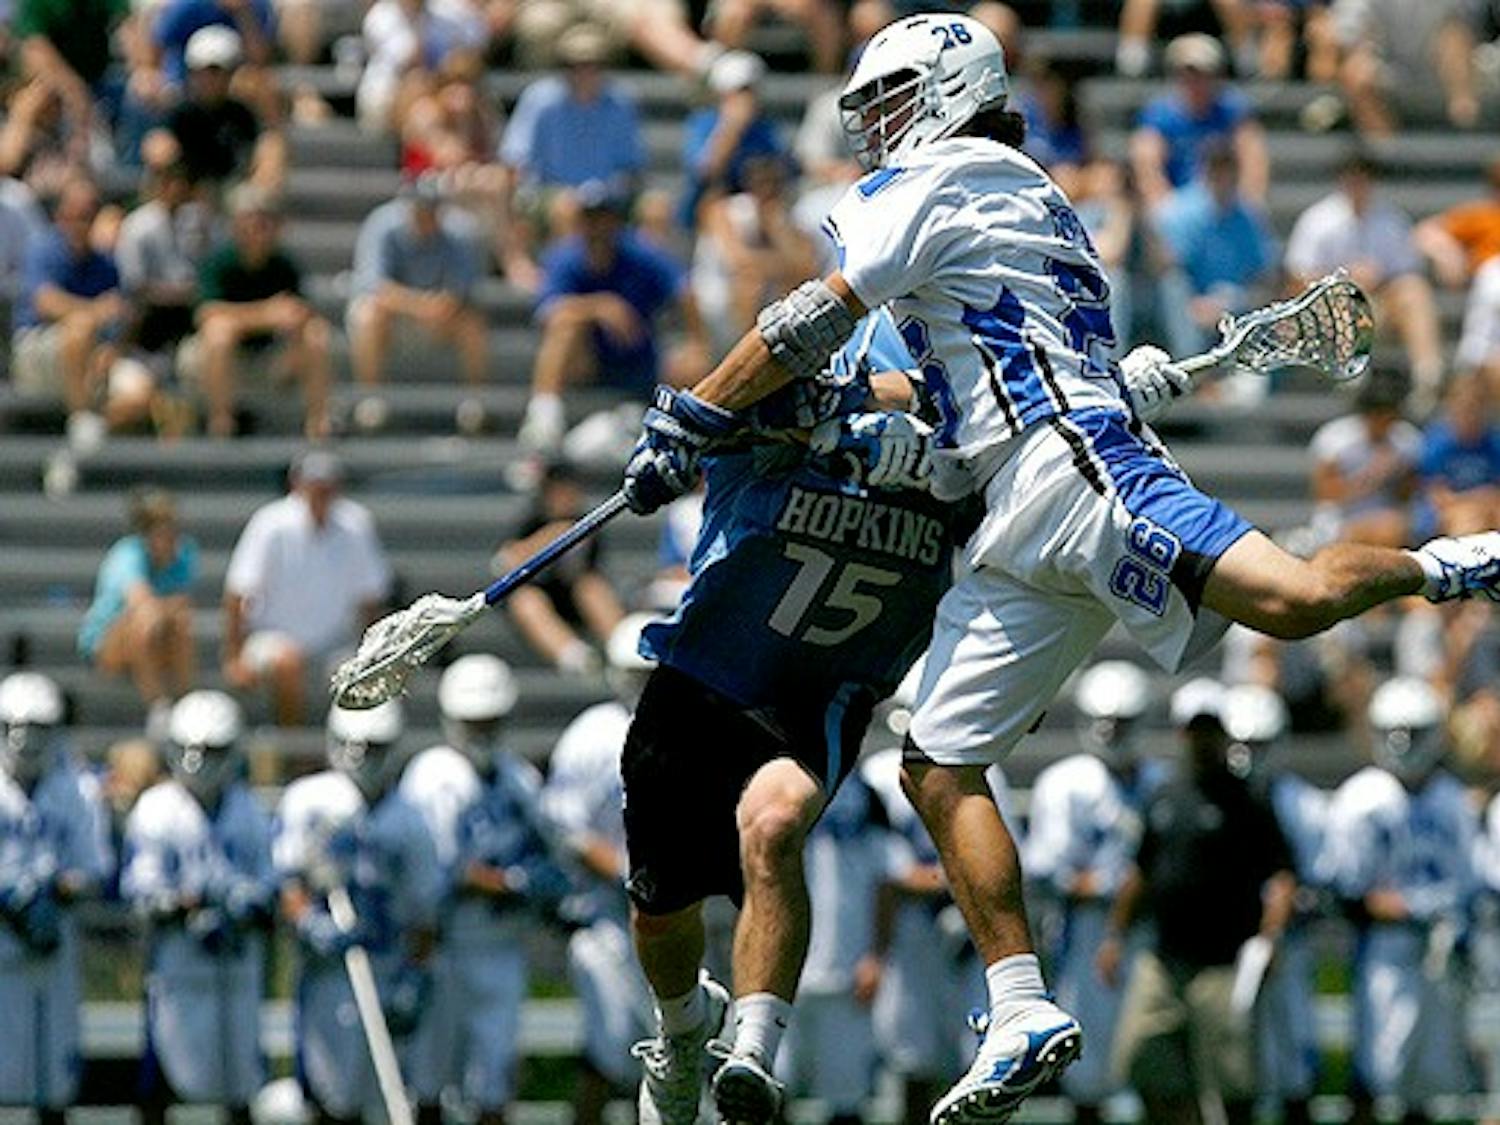 Sophomore Robert Rotanz, who had a goal and an assist in the game, flies over a Johns Hopkins defender.